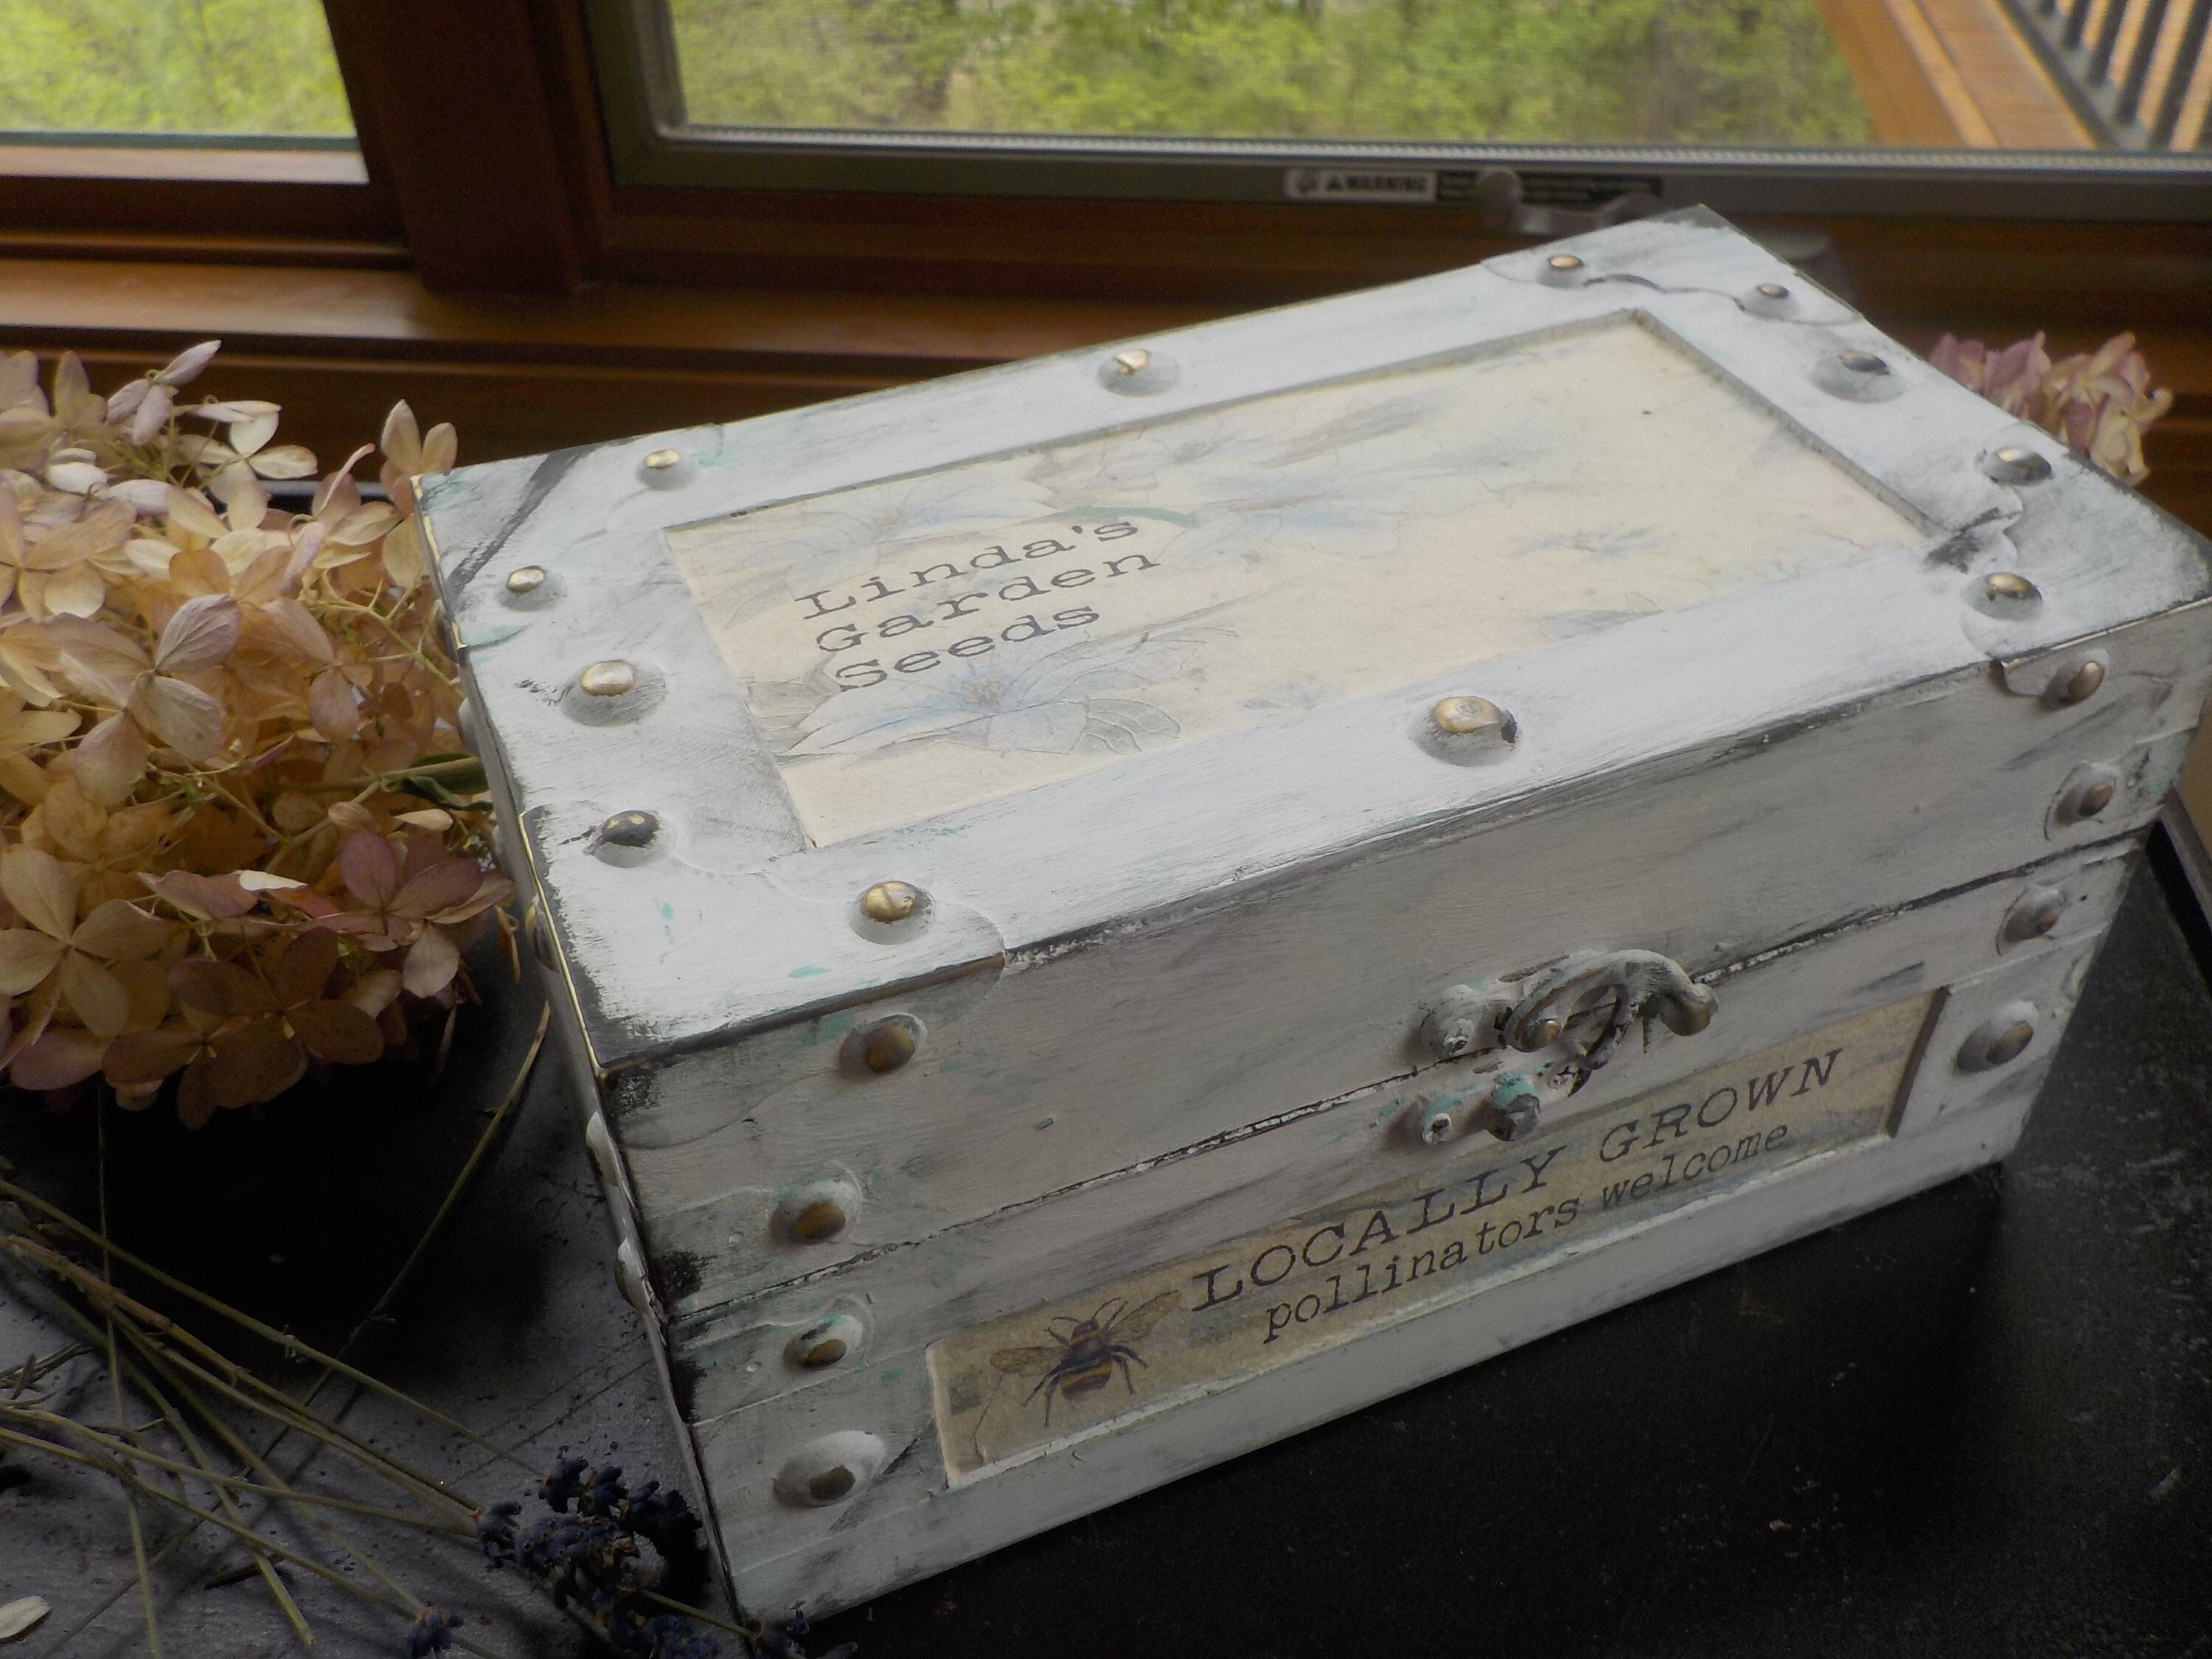 Mandeville & KING Co. Old Vintage FLOWER SEED BOX – TheBoxSF